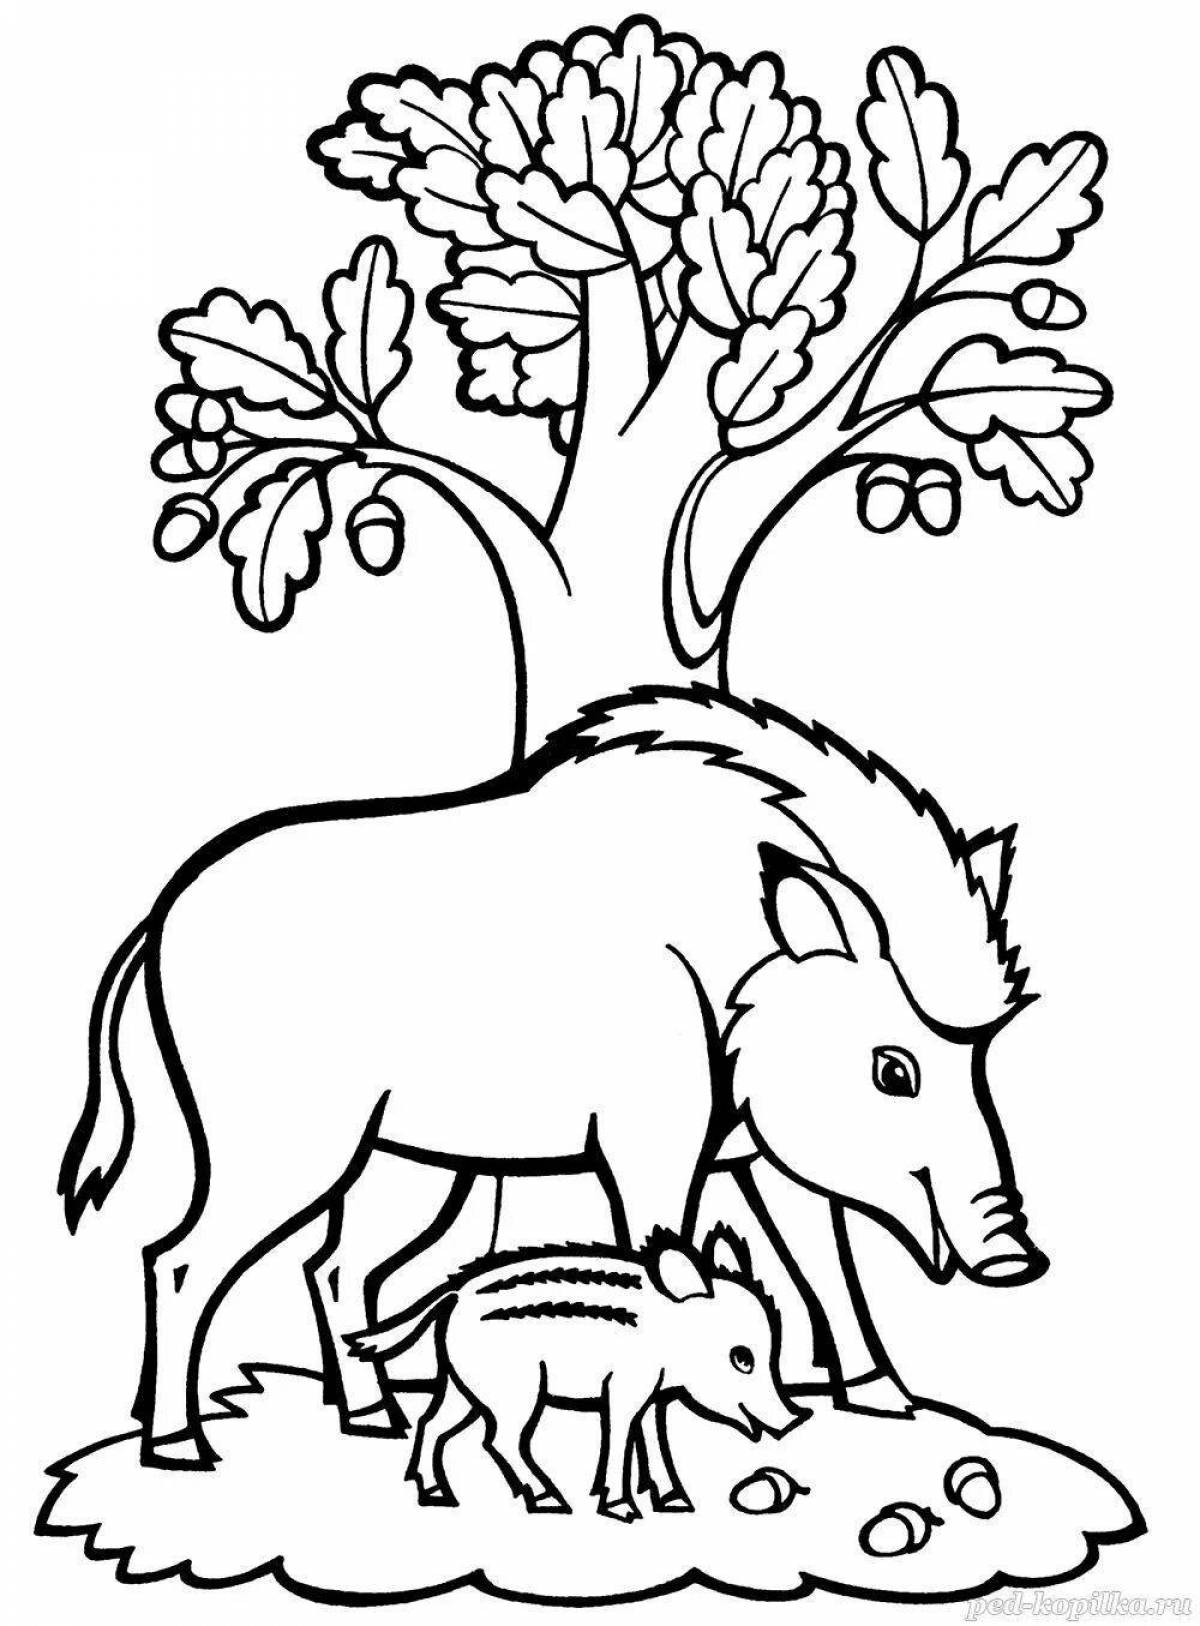 Coloring book magical forest animals for preschoolers